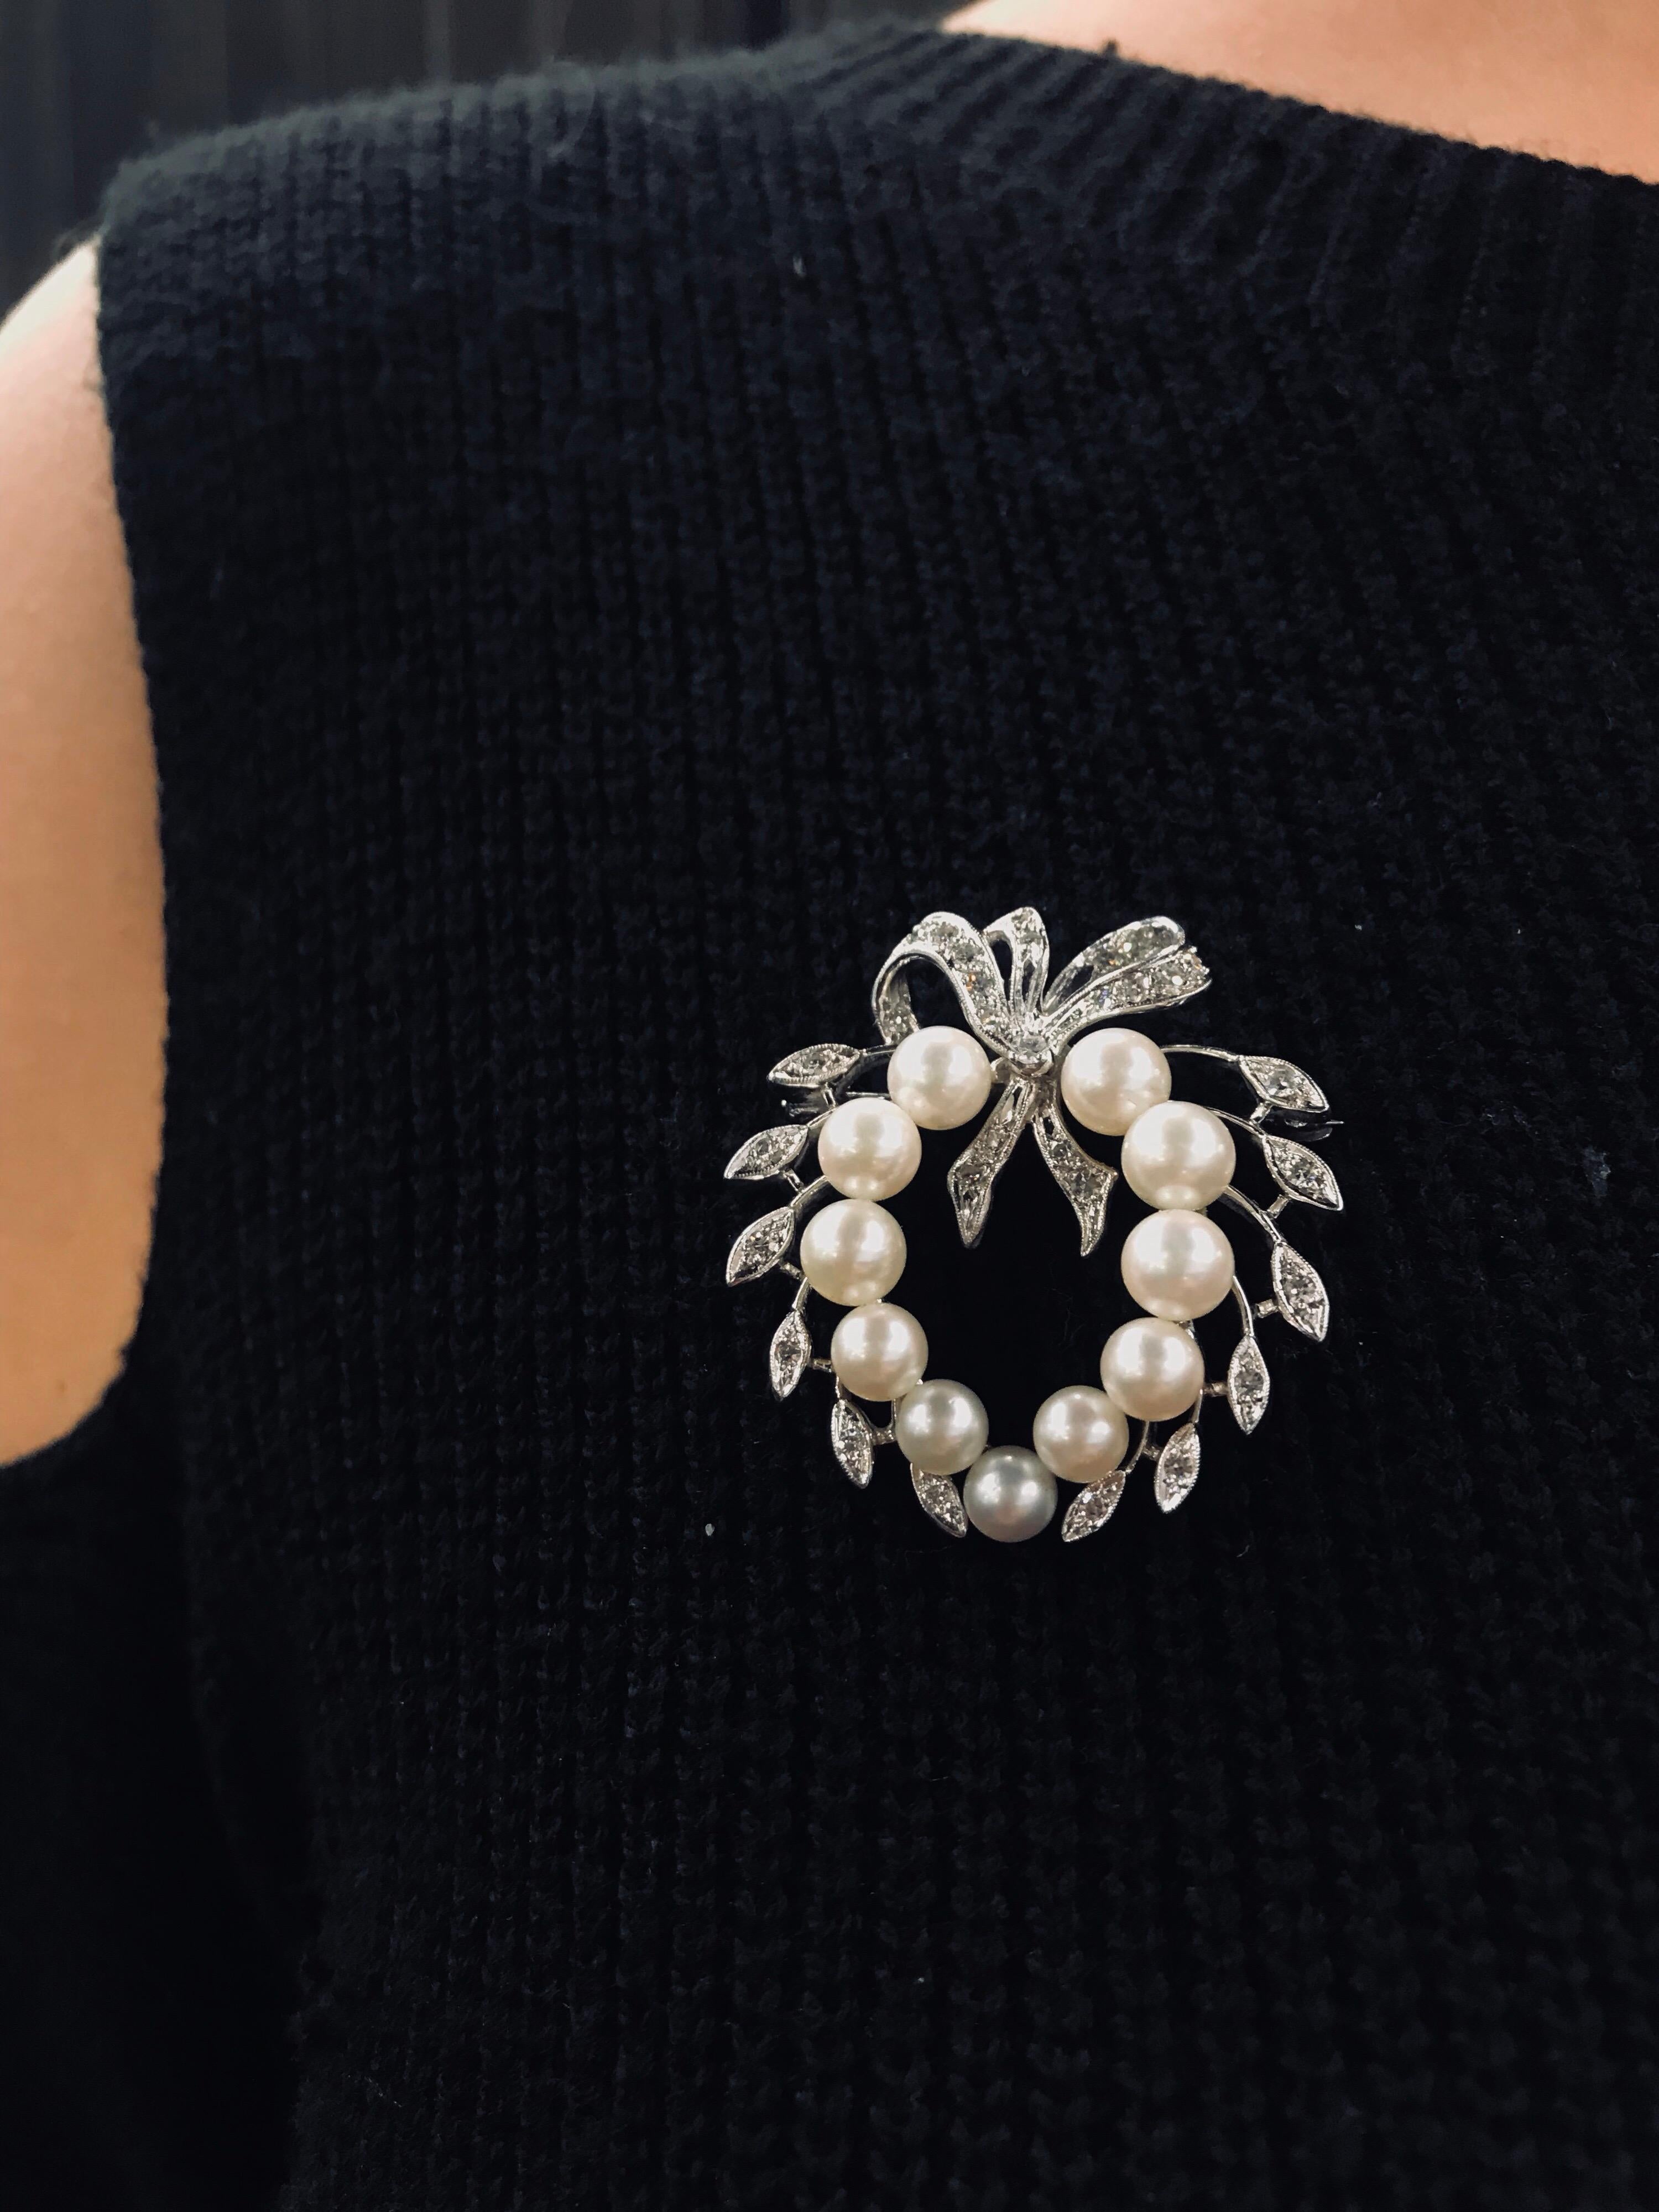 Vintage diamond and pearl brooch featuring 31 diamonds and 11 white pearls. 
Can be turned into a pendant.